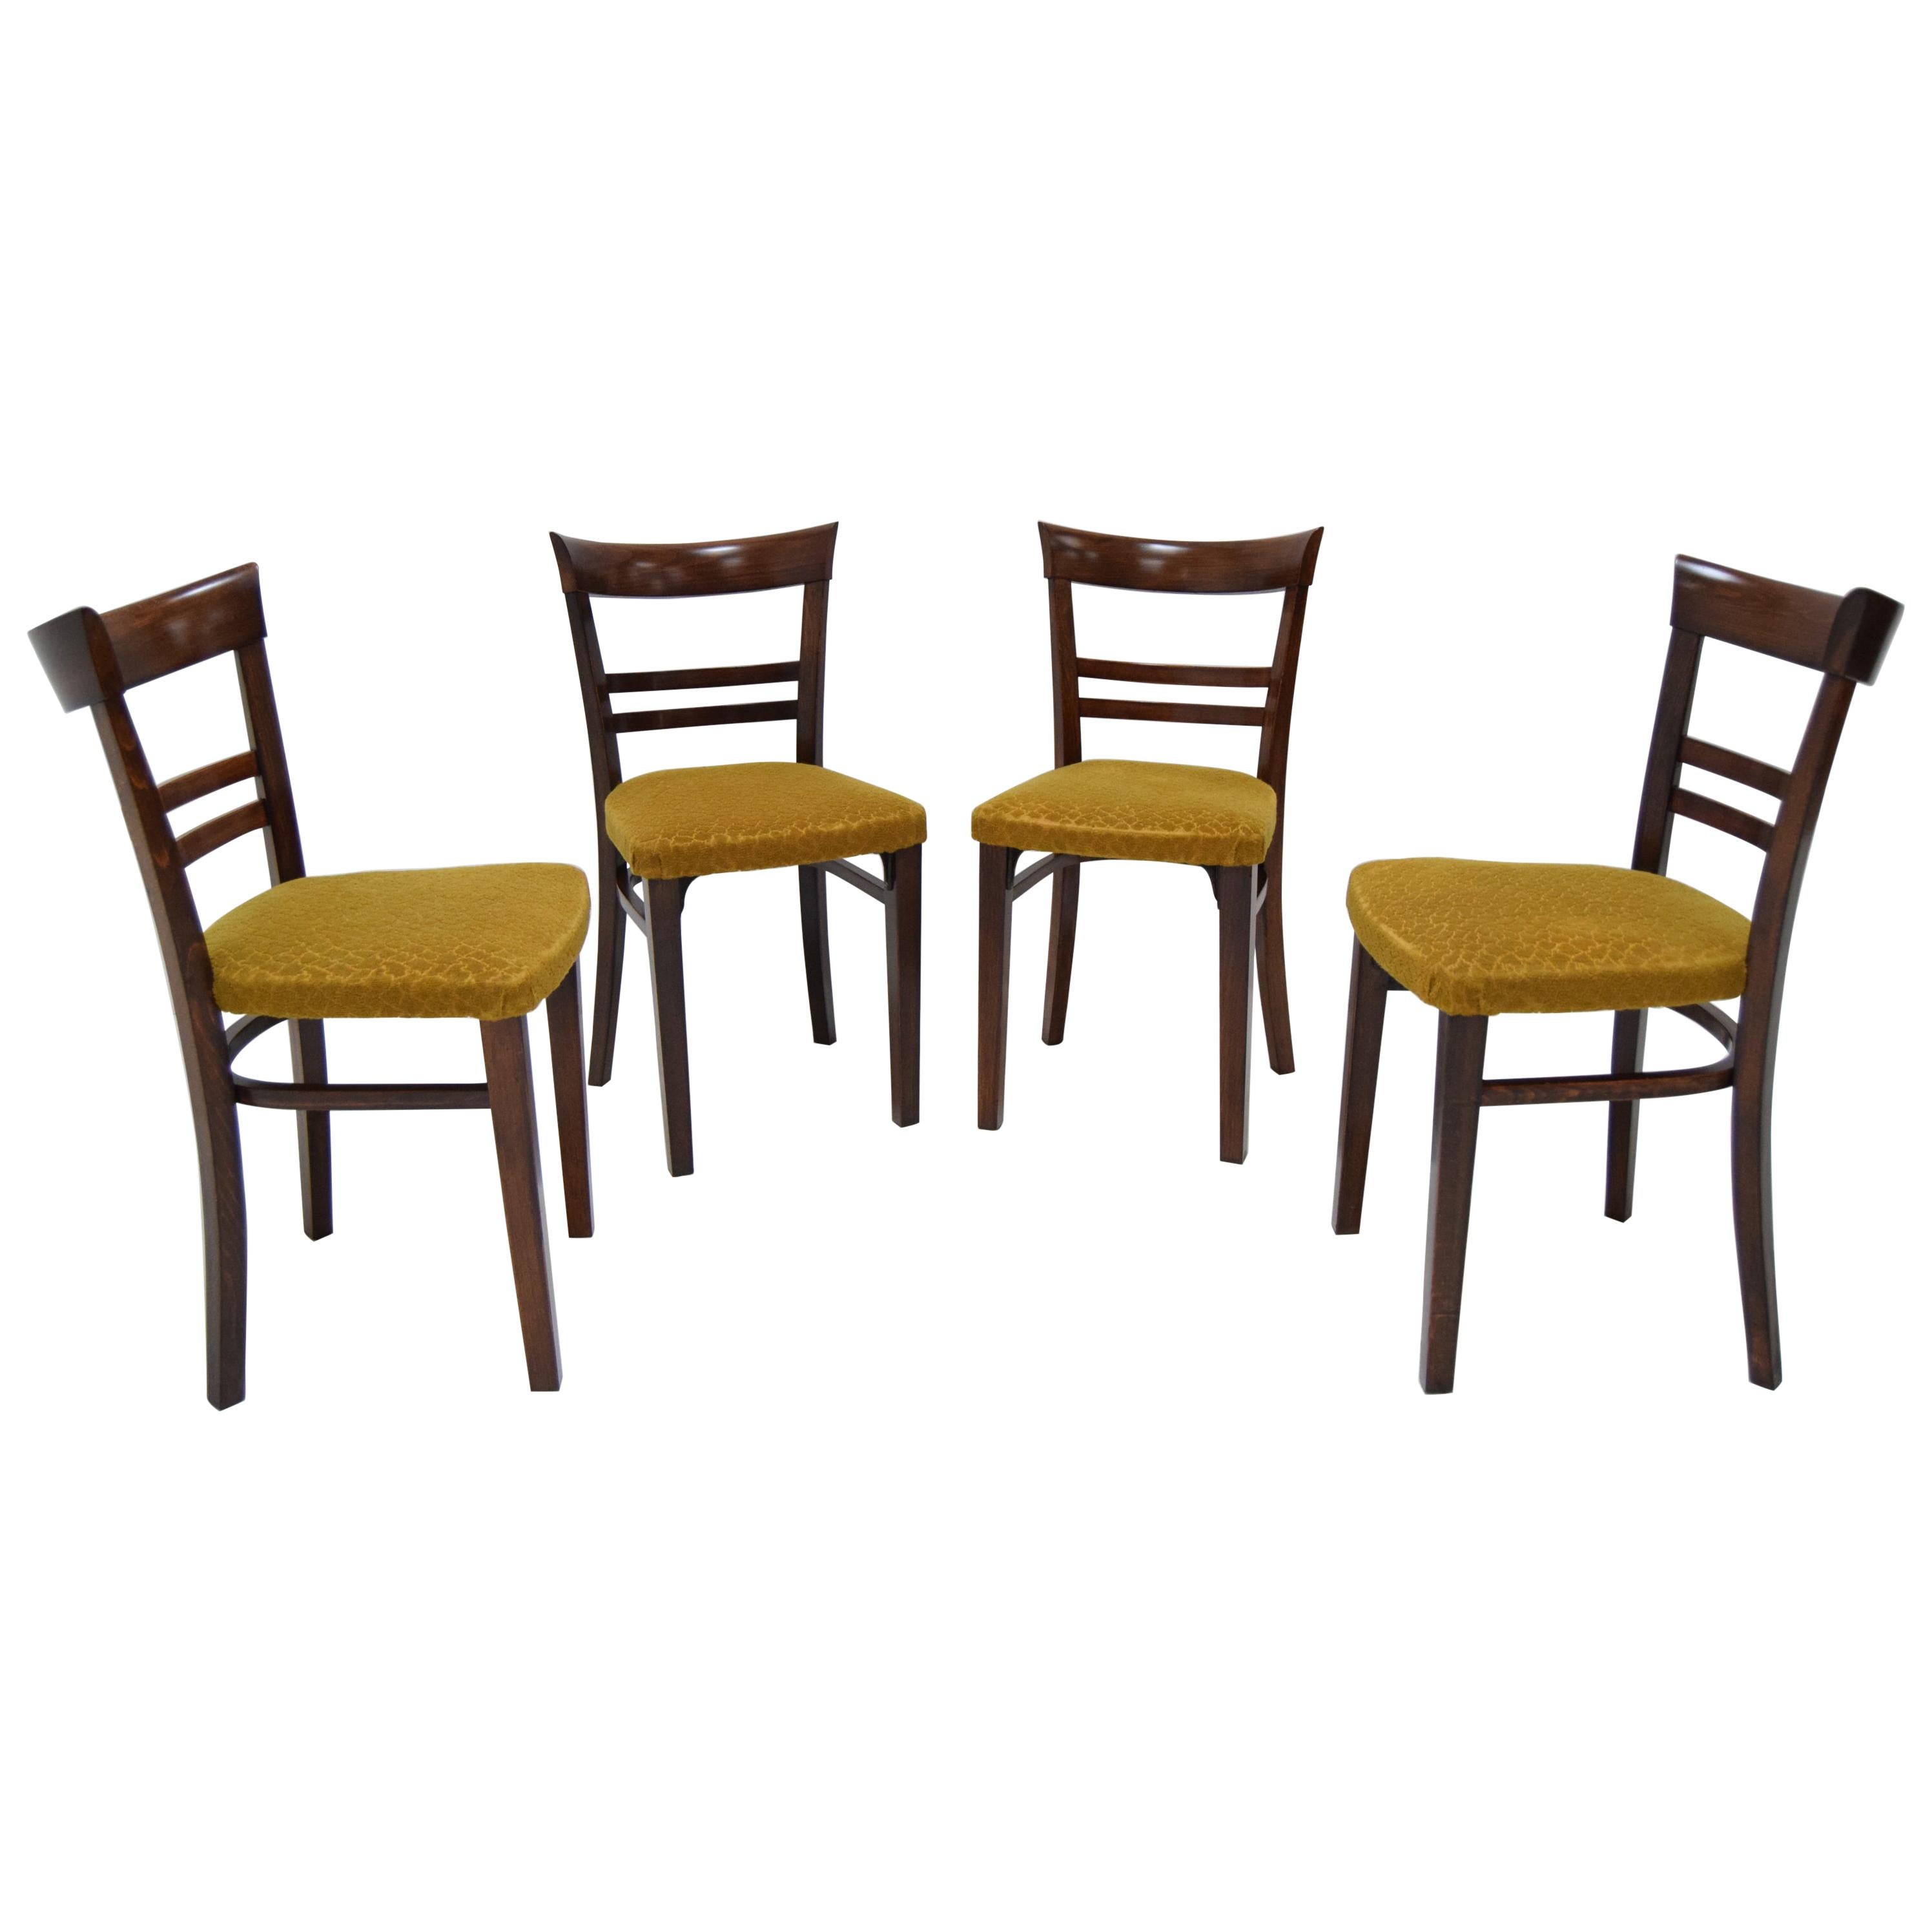 Set of Four Art Deco Dining Chairs by Fischel, 1930s